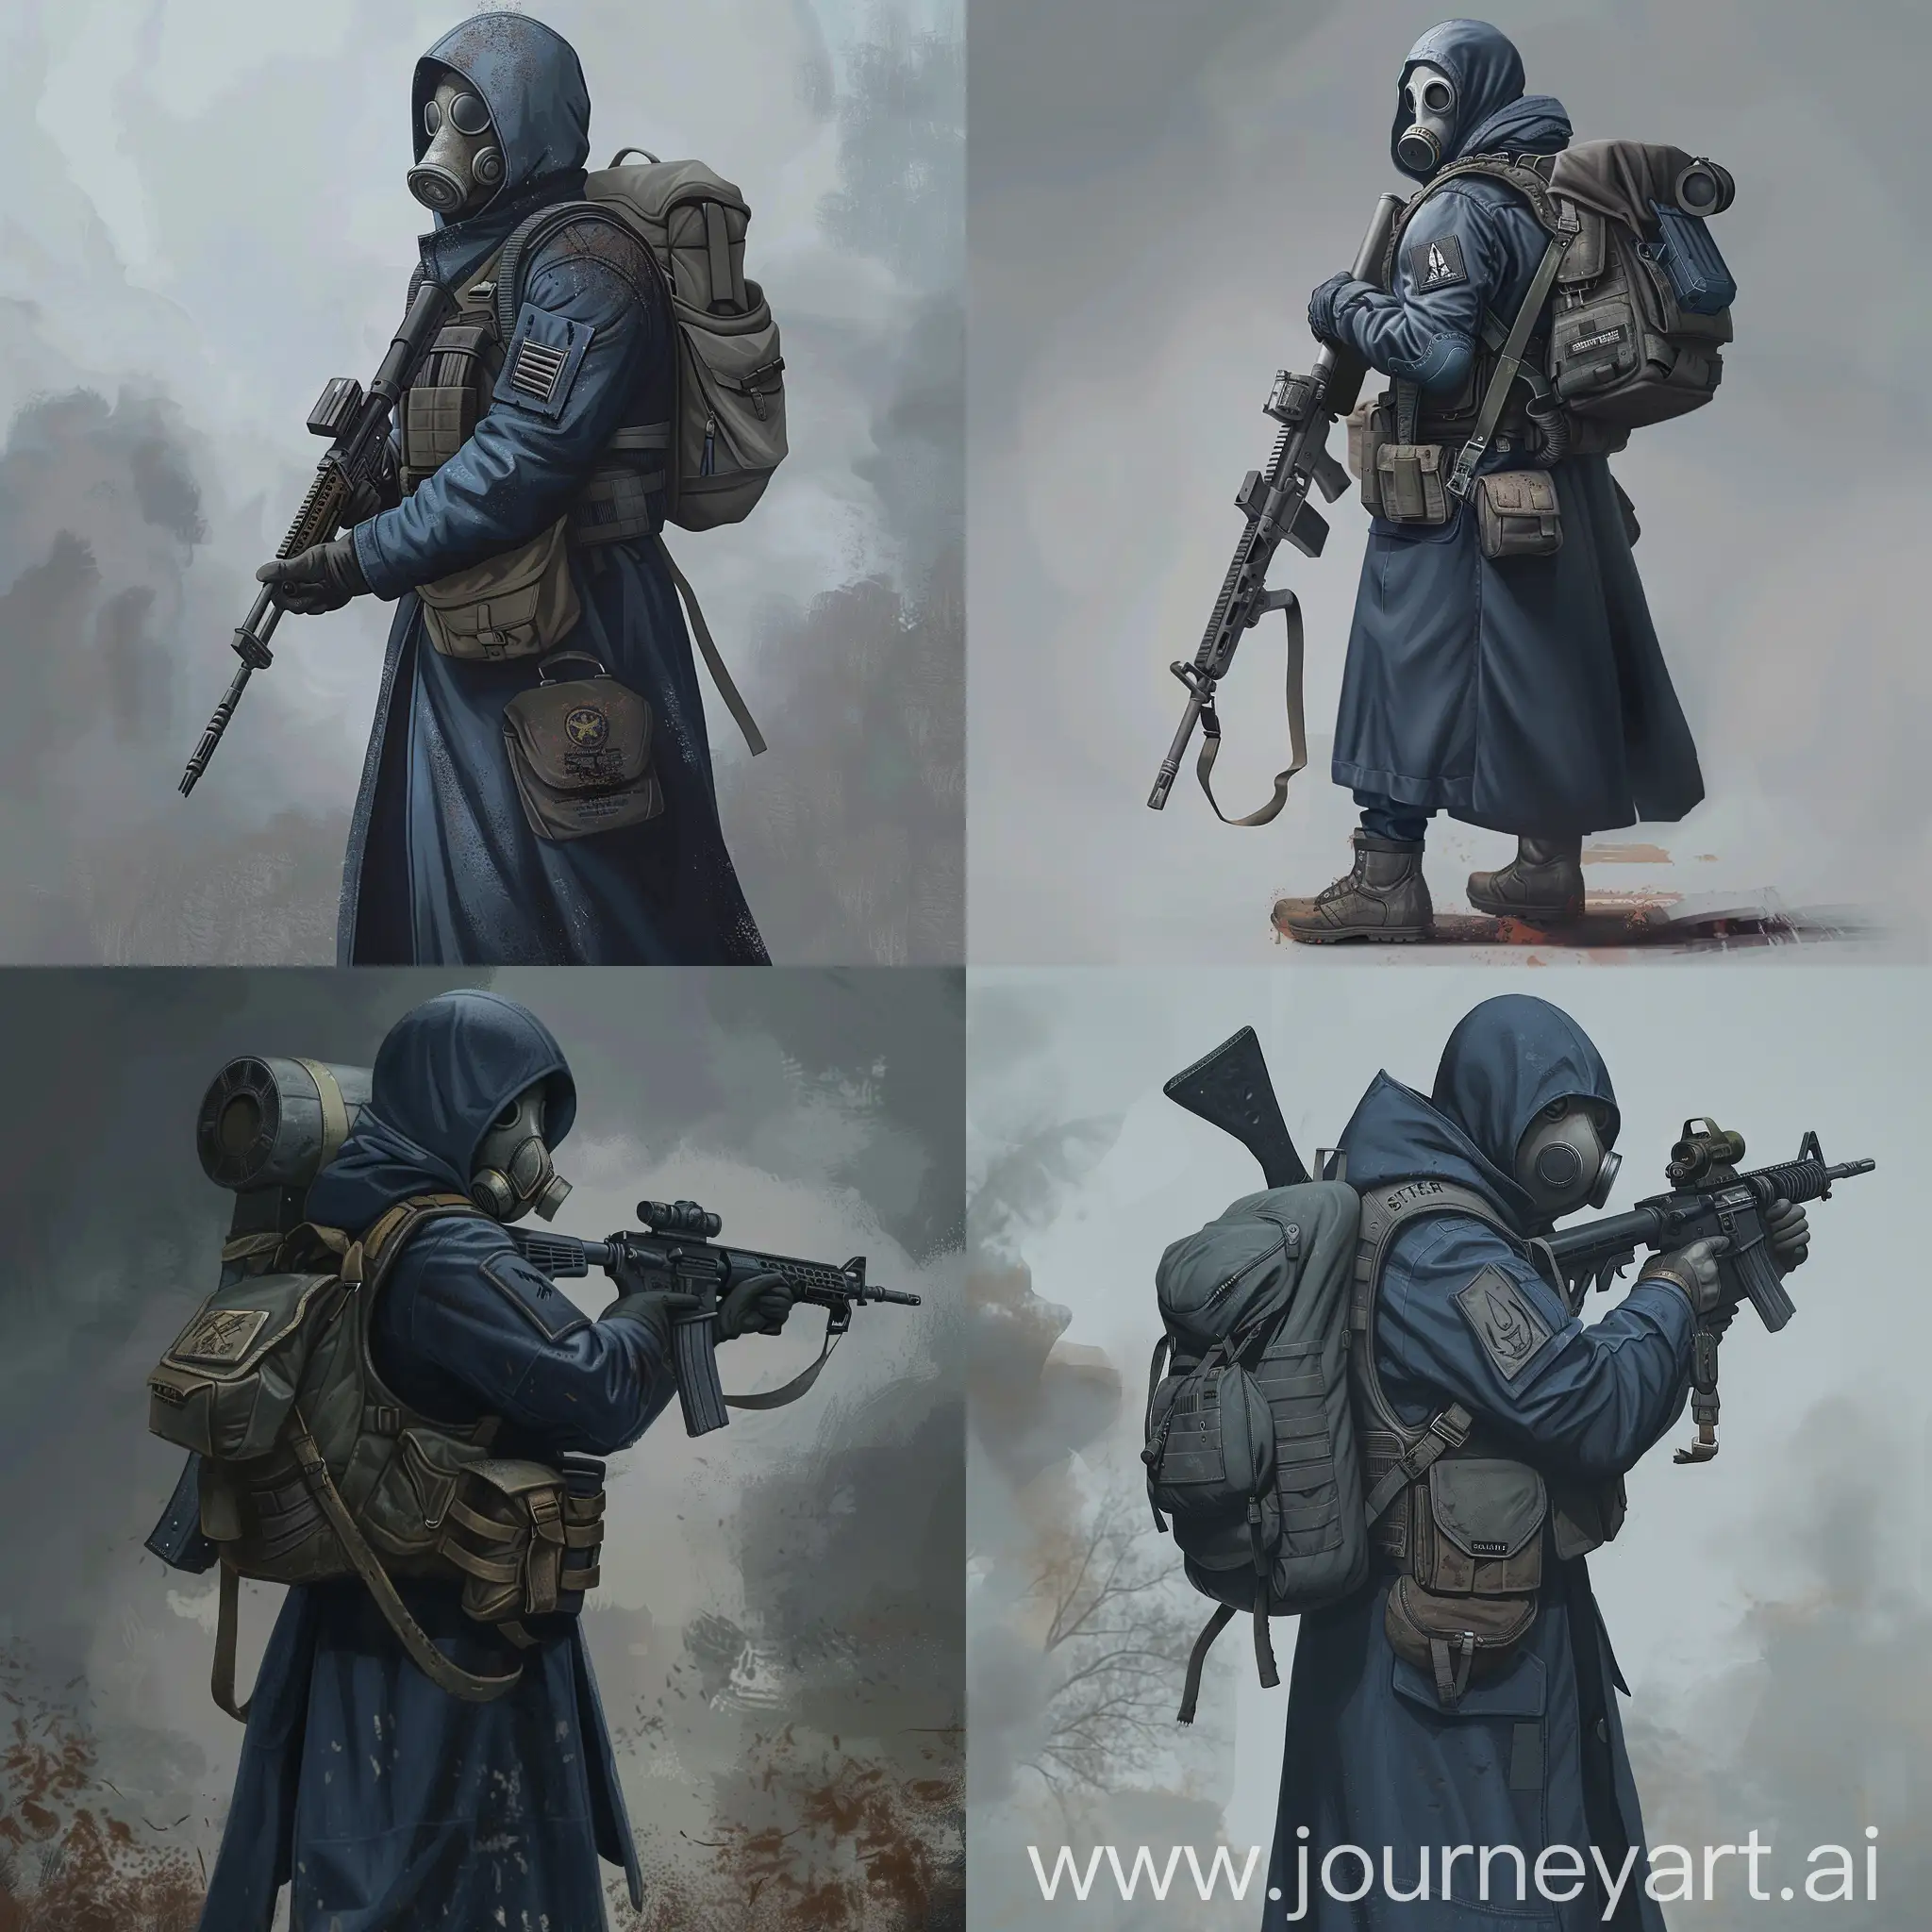 Digital concept art is a lone mercenary from the universe of S.T.A.L.K.E.R., dressed in a dark blue military raincoat, gray military armor on his body, a gasmask on his face, a military backpack on his back, a rifle in his hands.